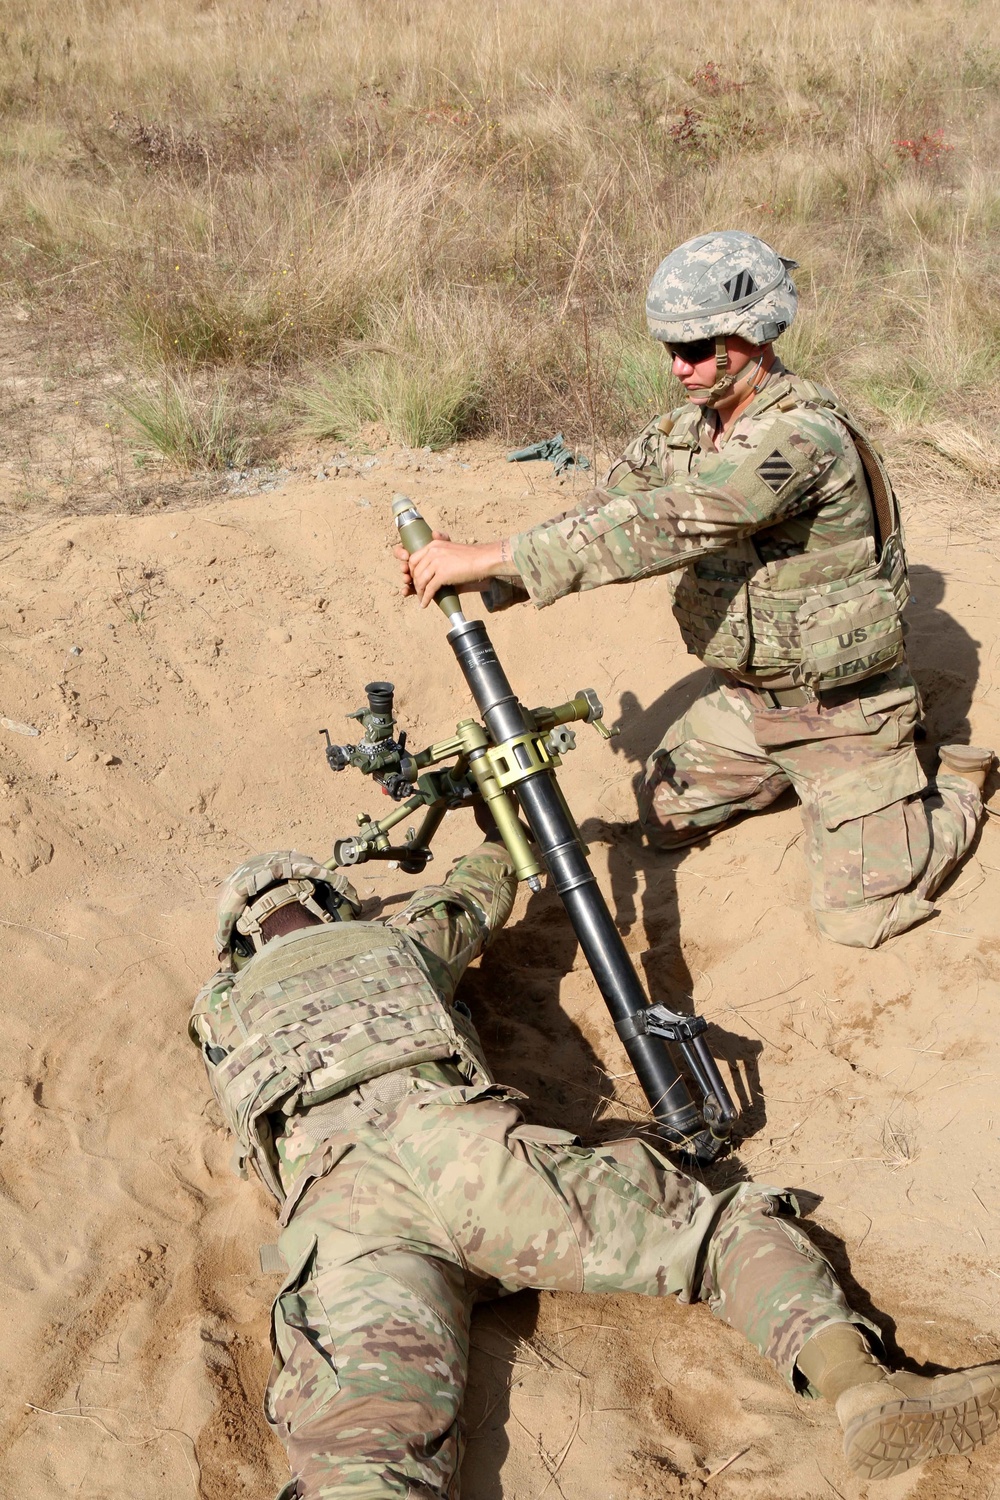 1st SFAB develops combat readiness with first-ever Live Fire Training